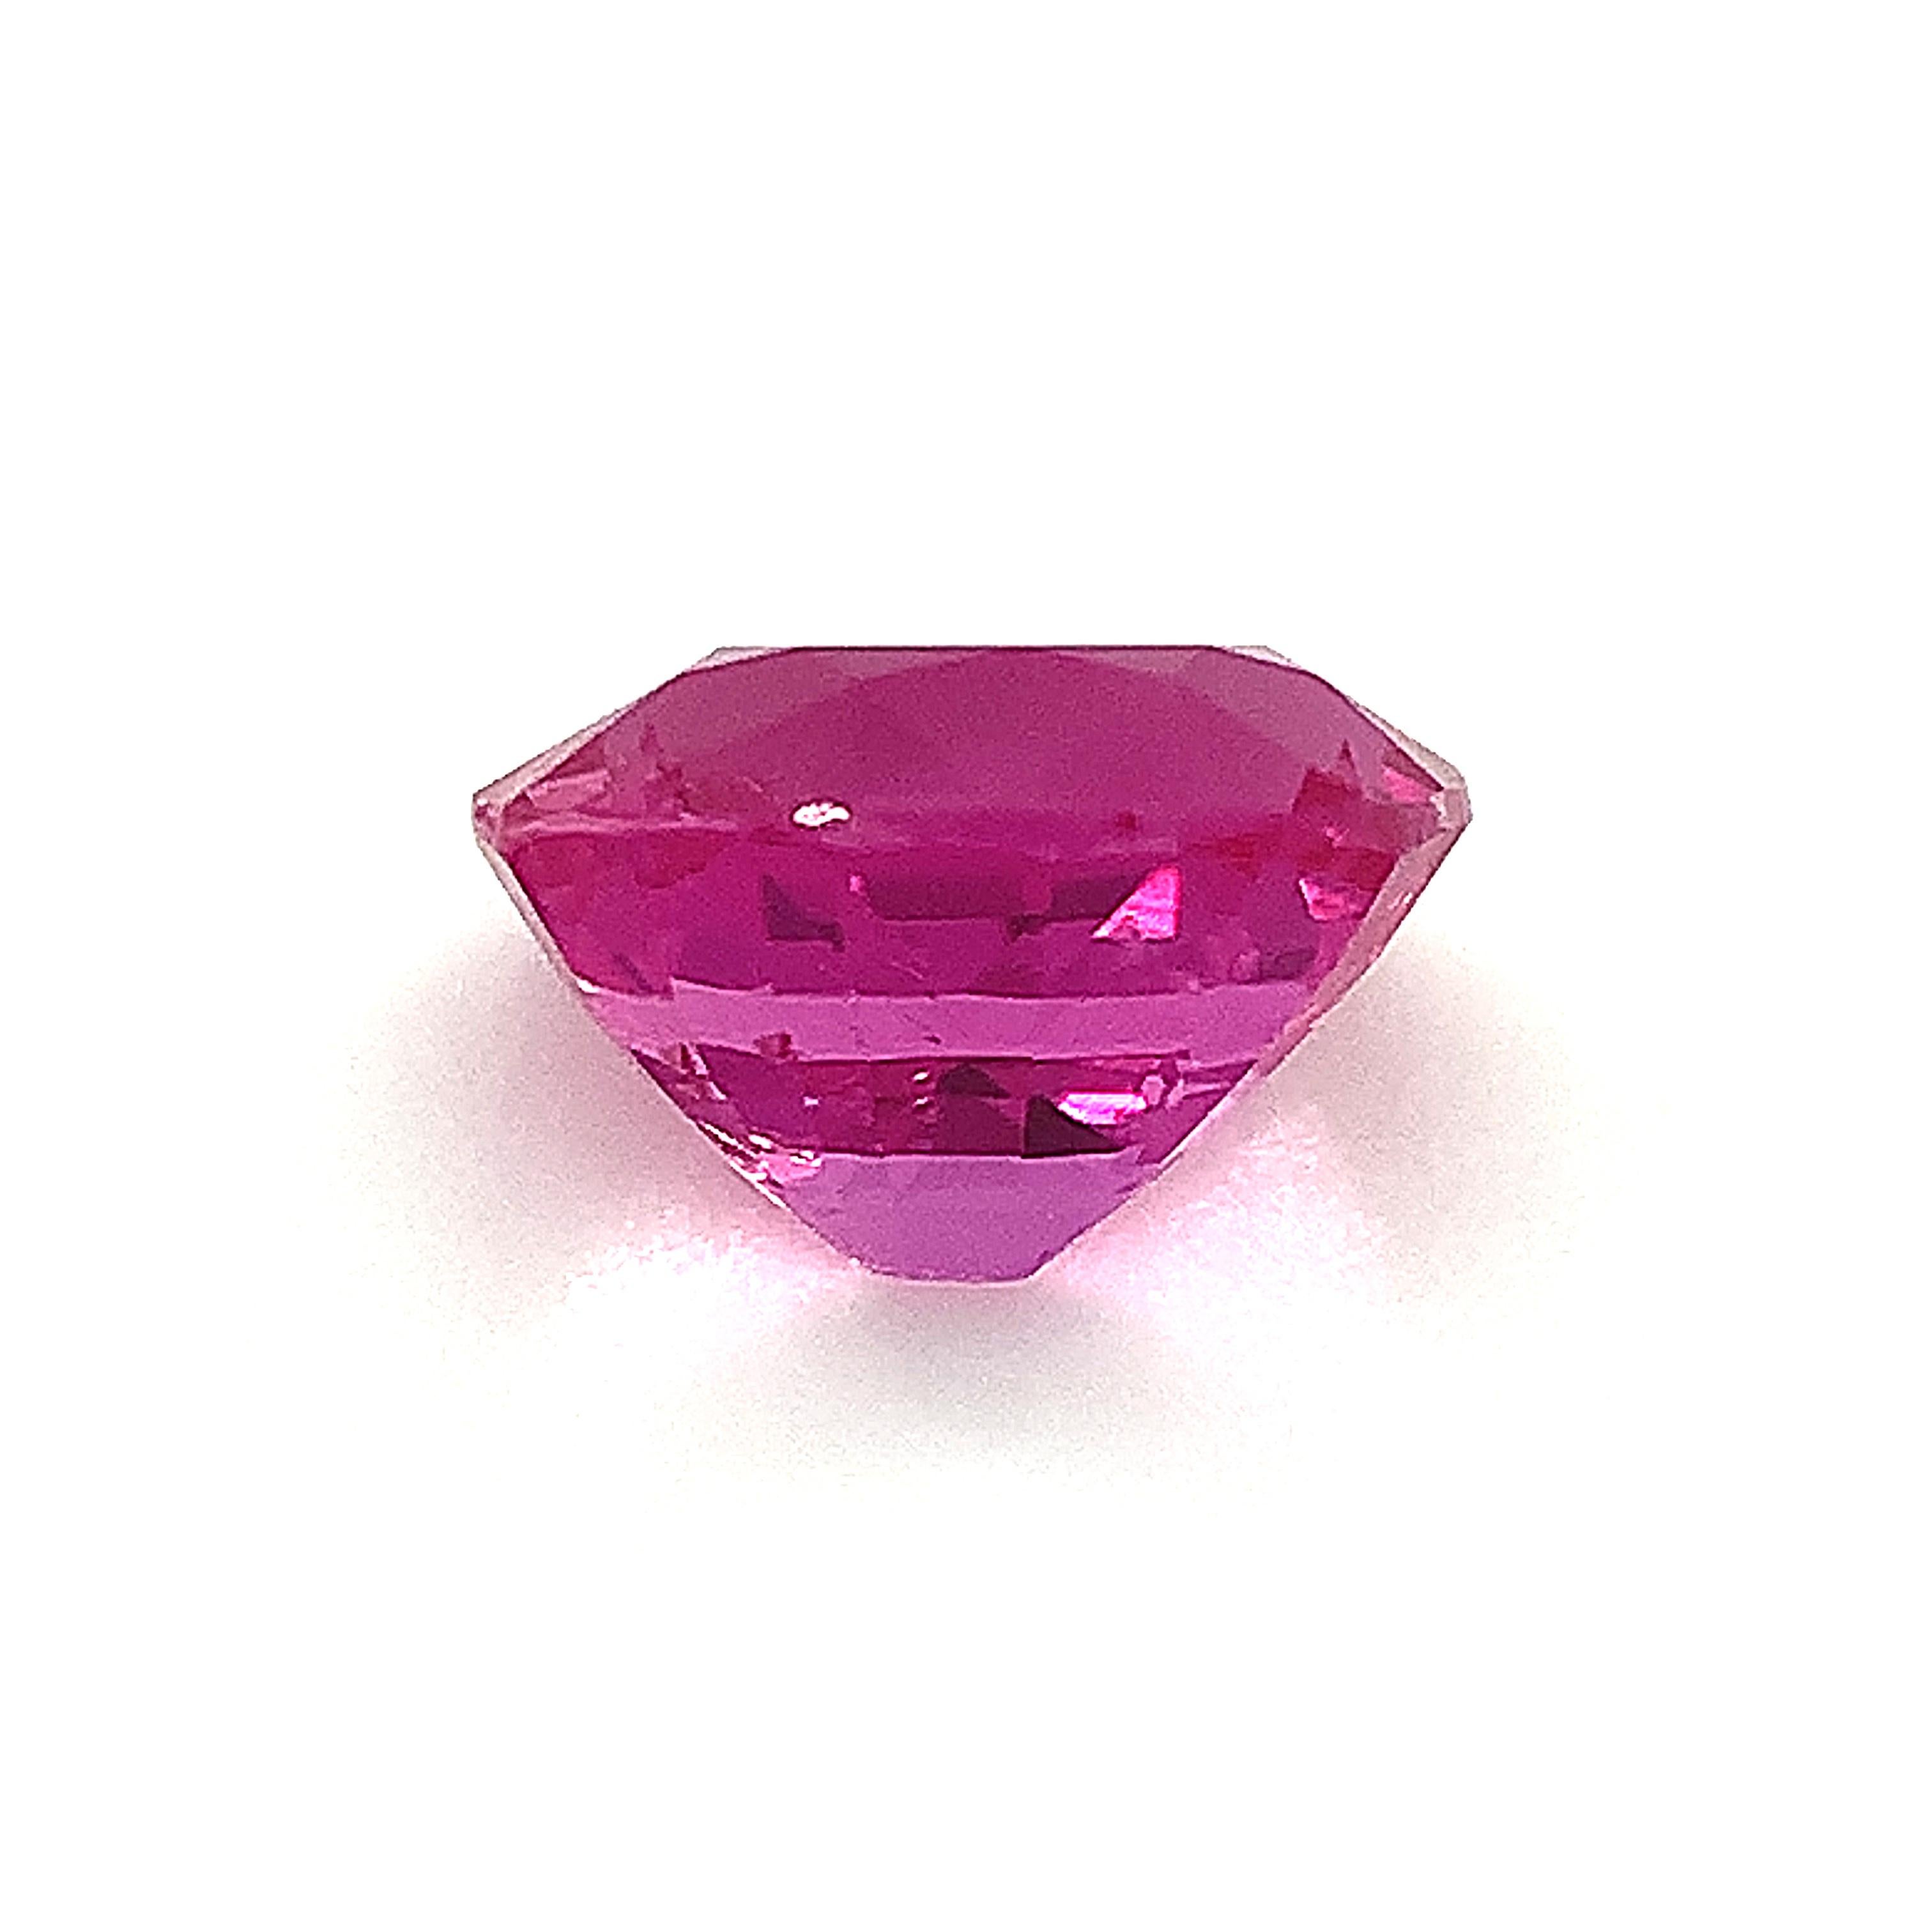 Women's or Men's Unheated 1.39 Carat Burmese Pink Sapphire, Unset Loose Gemstone, GIA Certified For Sale